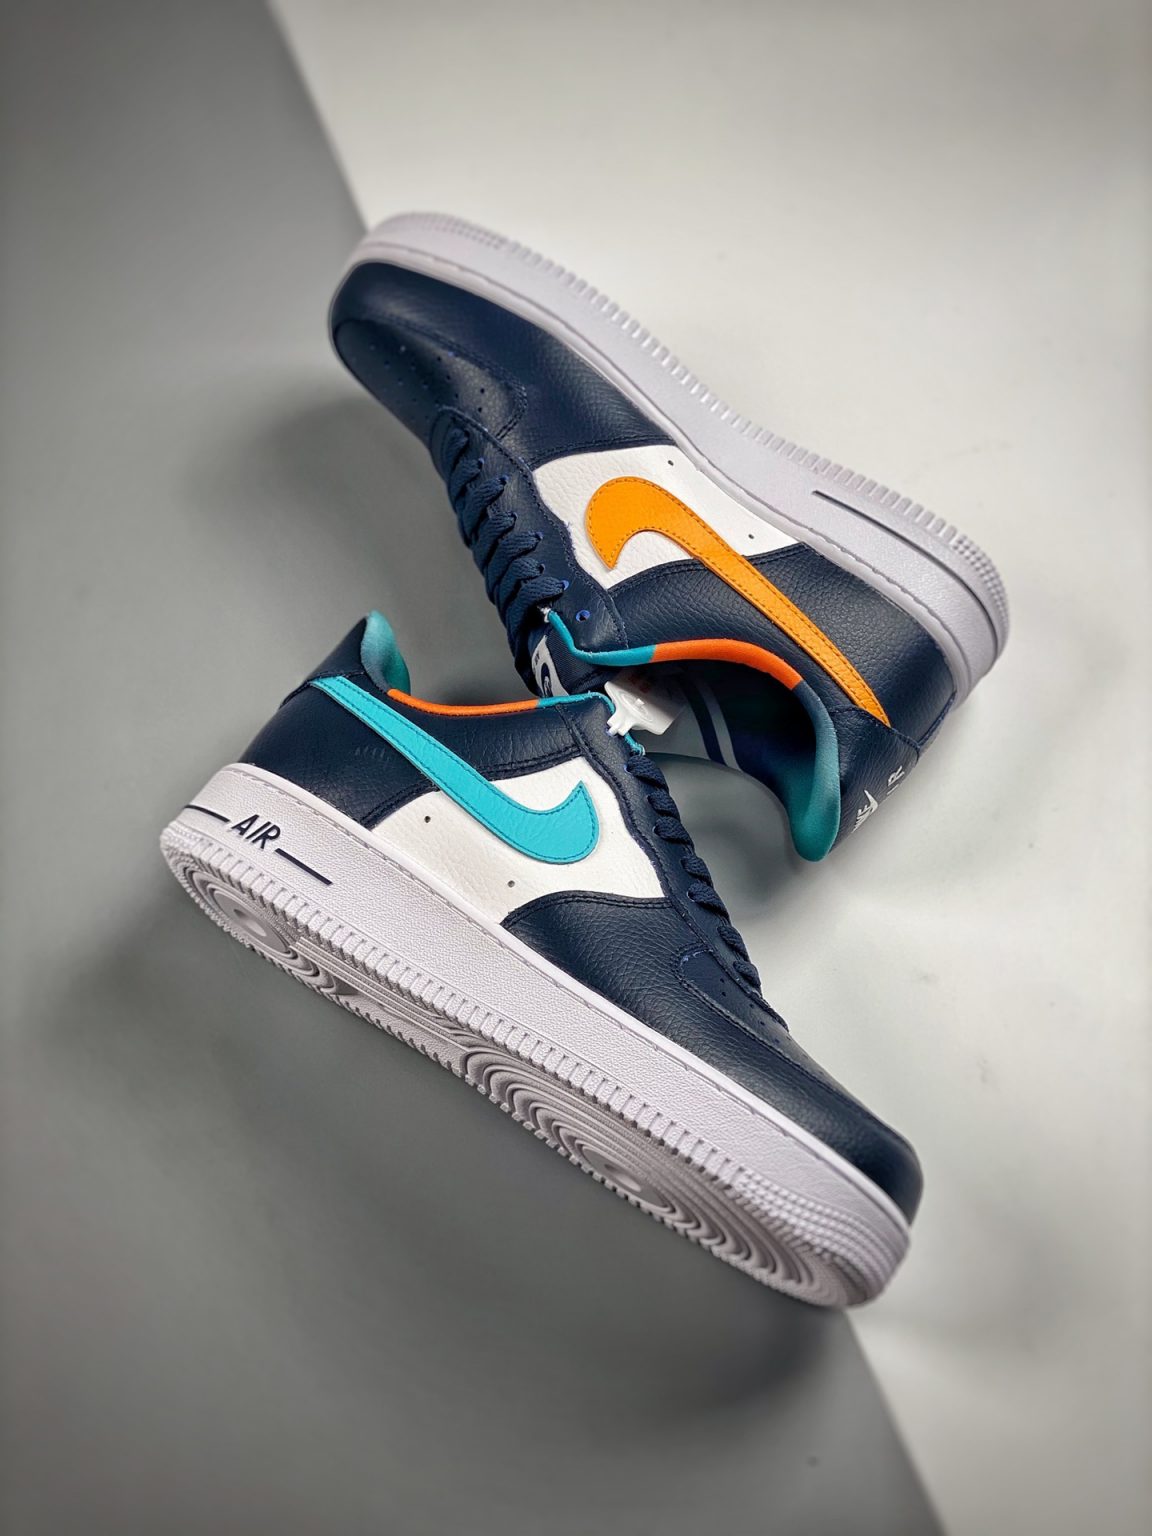 Nike Air Force 1 Low EMB Thunder Blue/Washed Teal DM0109-400 For Sale ...